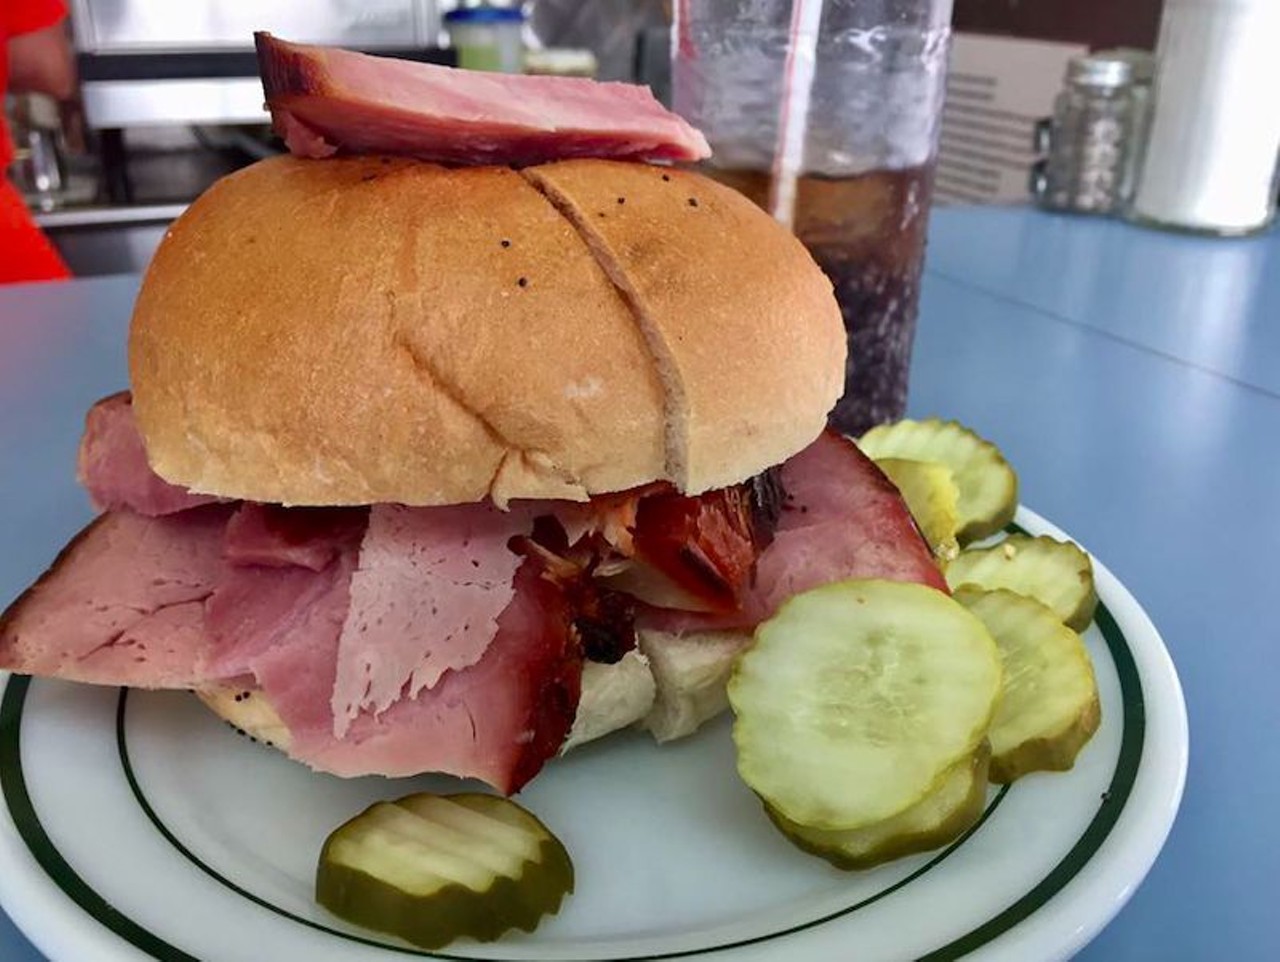 Mike&#146;s Famous Ham Place
3700 Michigan Ave., Detroit; 313-894-6922; mikesfamoushamplace.food-places.com
Mike&#146;s has been serving different variations of ham for breakfast, lunch, and dinner for decades. Menu items include ham and egg sandwiches, ham melts, and more.
Photo via Mike&#146;s Famous Ham Place / Facebook